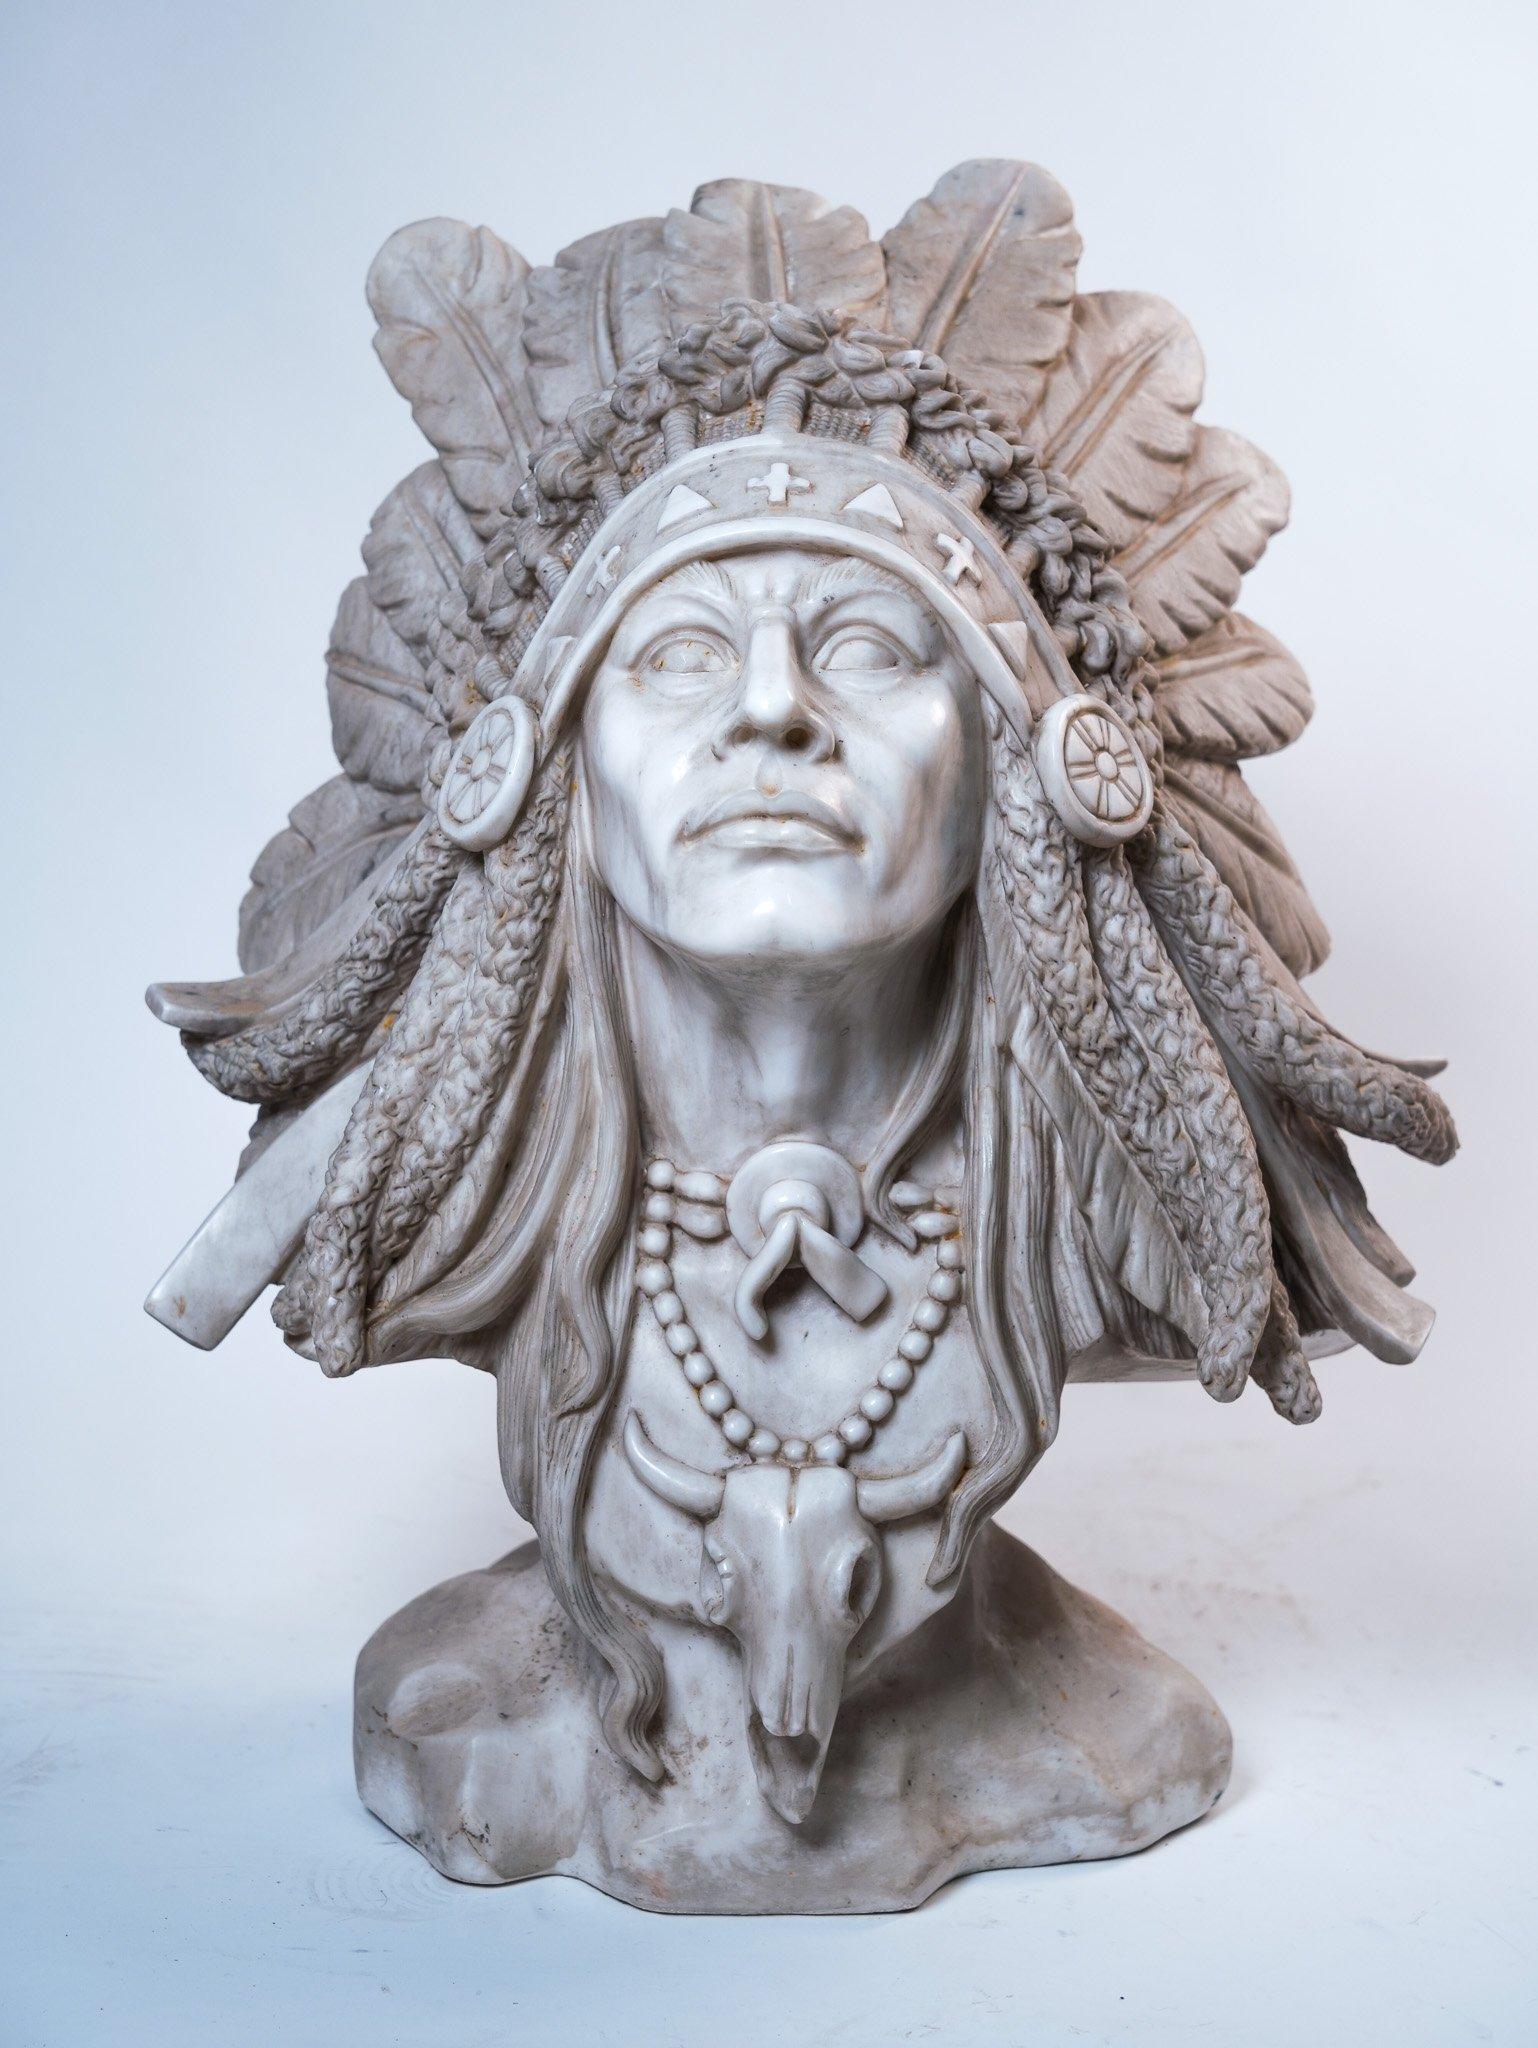 Description
Indian art marble sculpture, Apache bust. ADDITIONAL PHOTOS, INFORMATION OF THE LOT AND SHIPPING INFORMATION CAN BE REQUEST BY SENDING AN EMAIL.
Tags: Scultura Indiana art. arte de la escultura india. Art de la sculpture indienne.